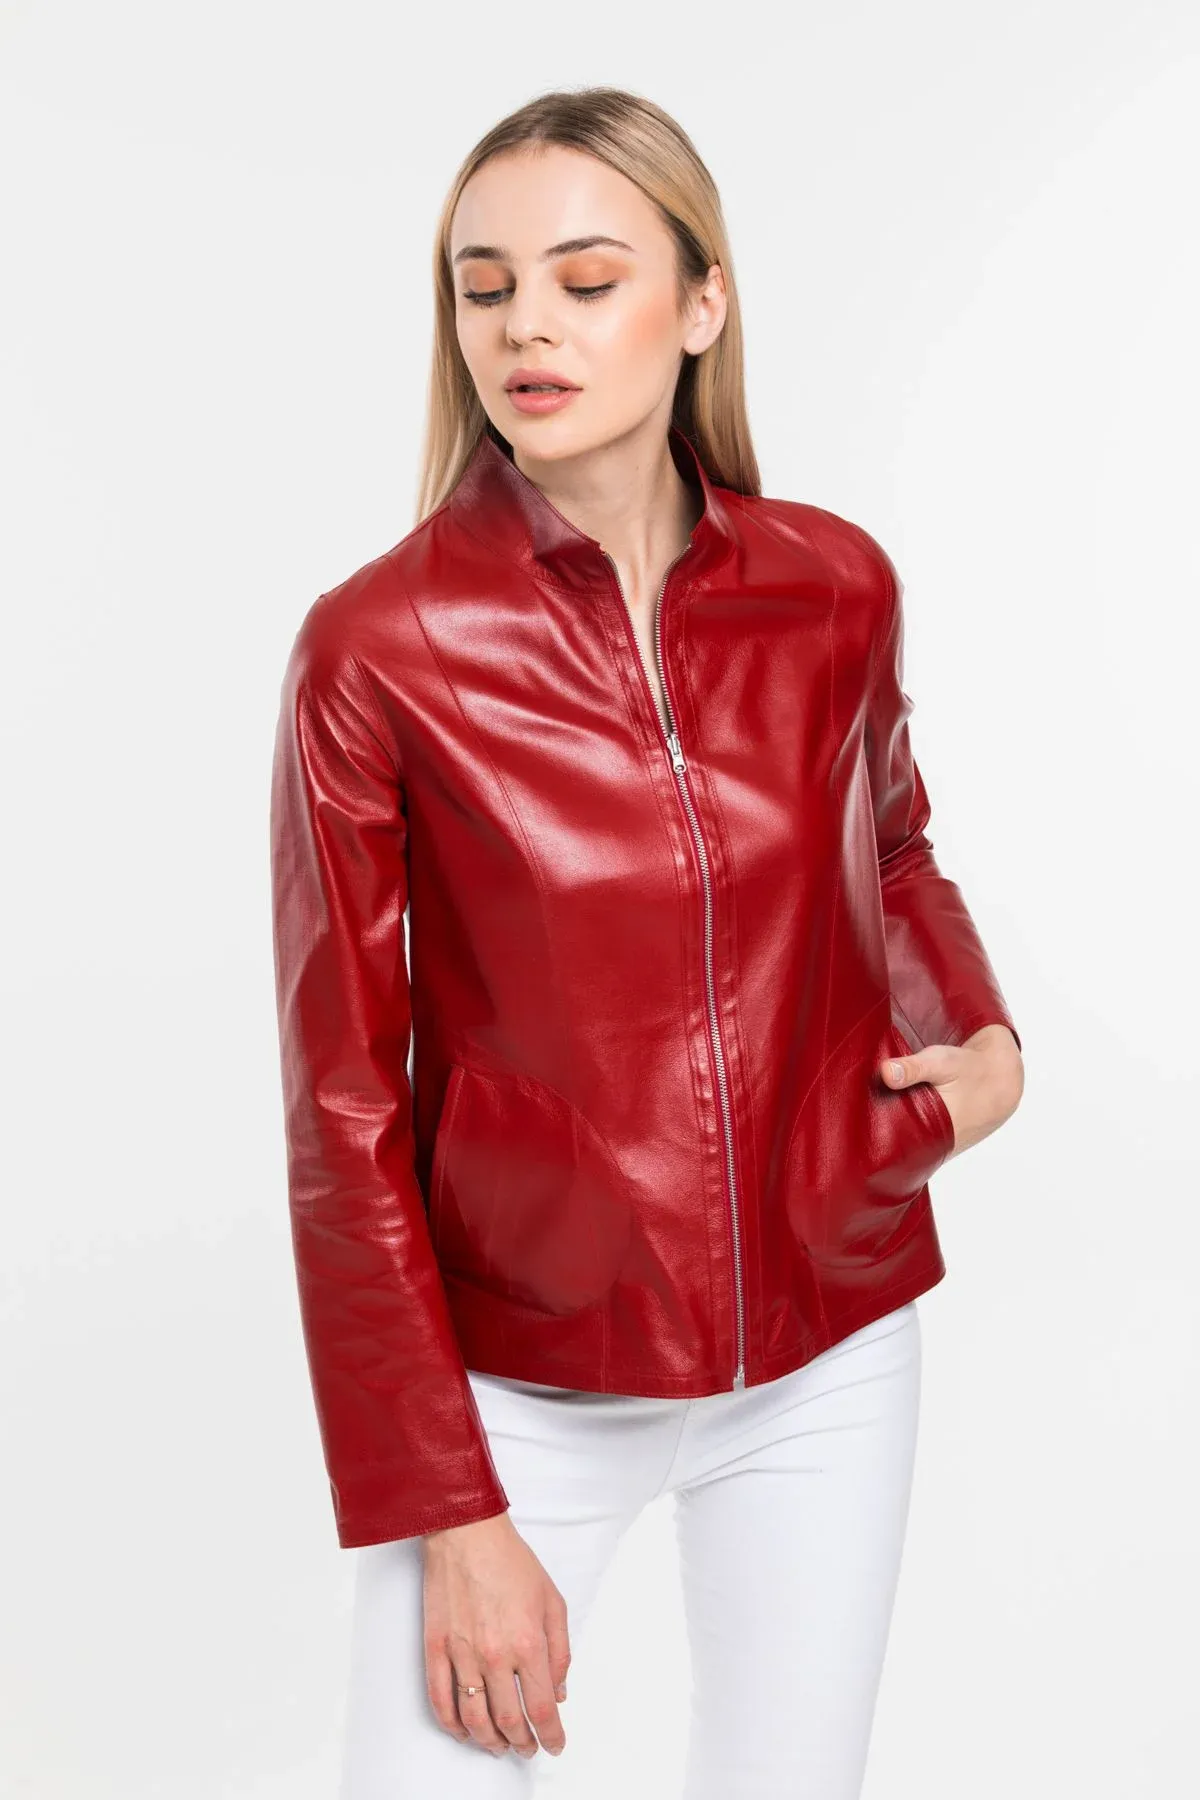 Reversible Leather Jacket For Women's